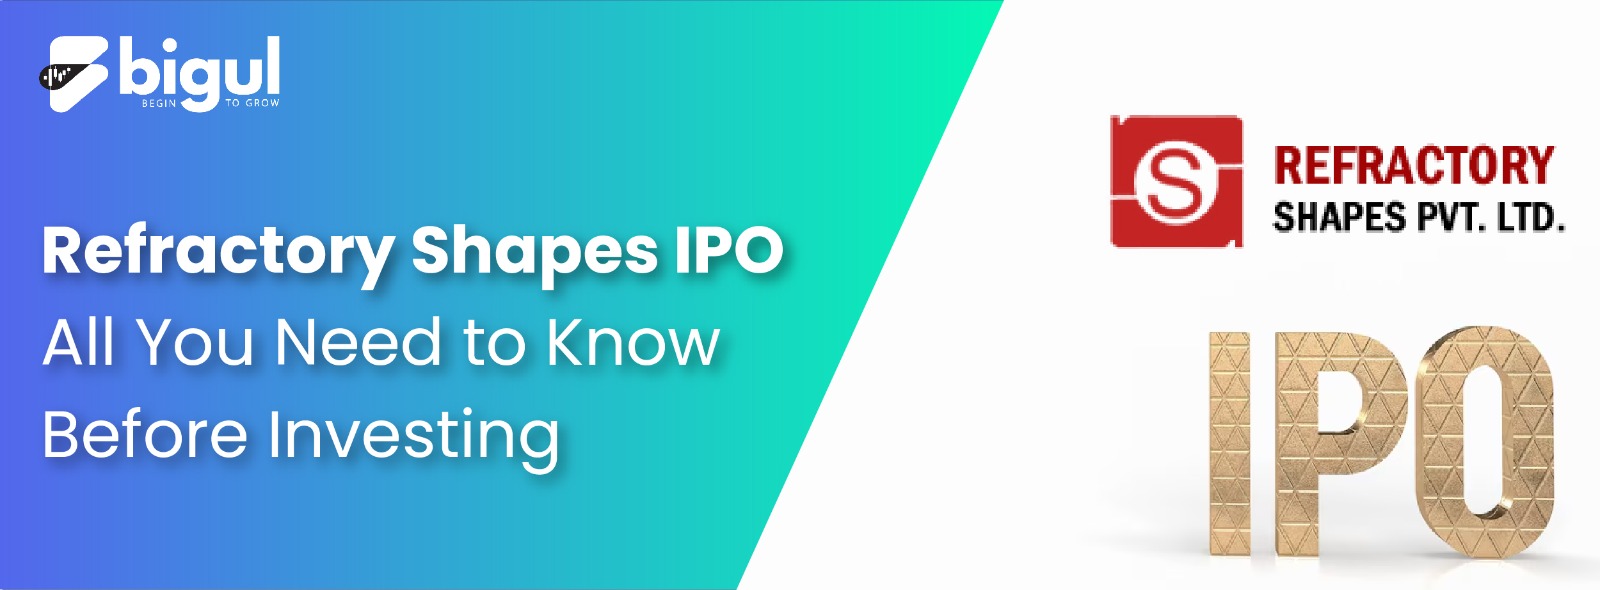 Refractory Shapes IPO: All You Need to Know Before Investing